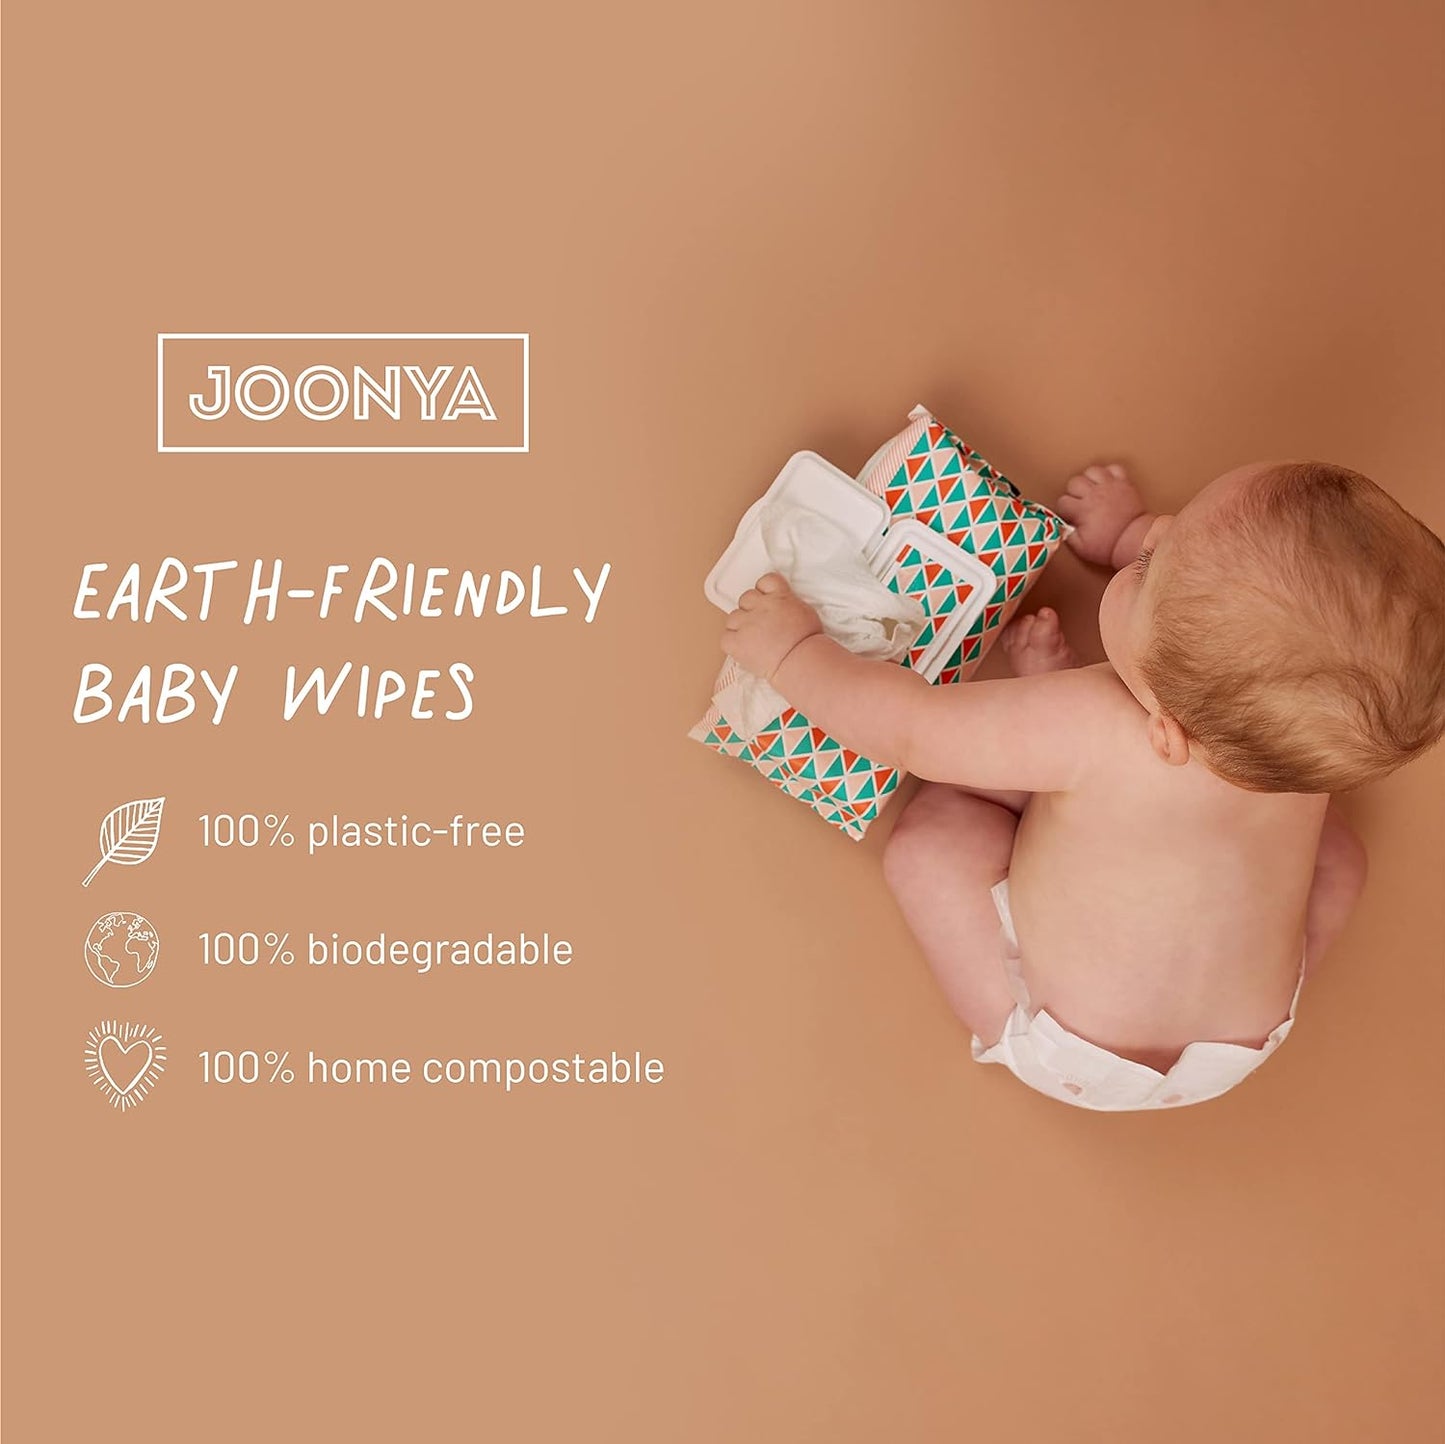 Joonya Baby Wipes - Non-Toxic, Biodegradable Baby Wipes for Calm, Healthy Skin - Fragrance Free Baby Wipes - Bulk Baby Wipes - 3 Packs of 80 Nappy Wipes (240)